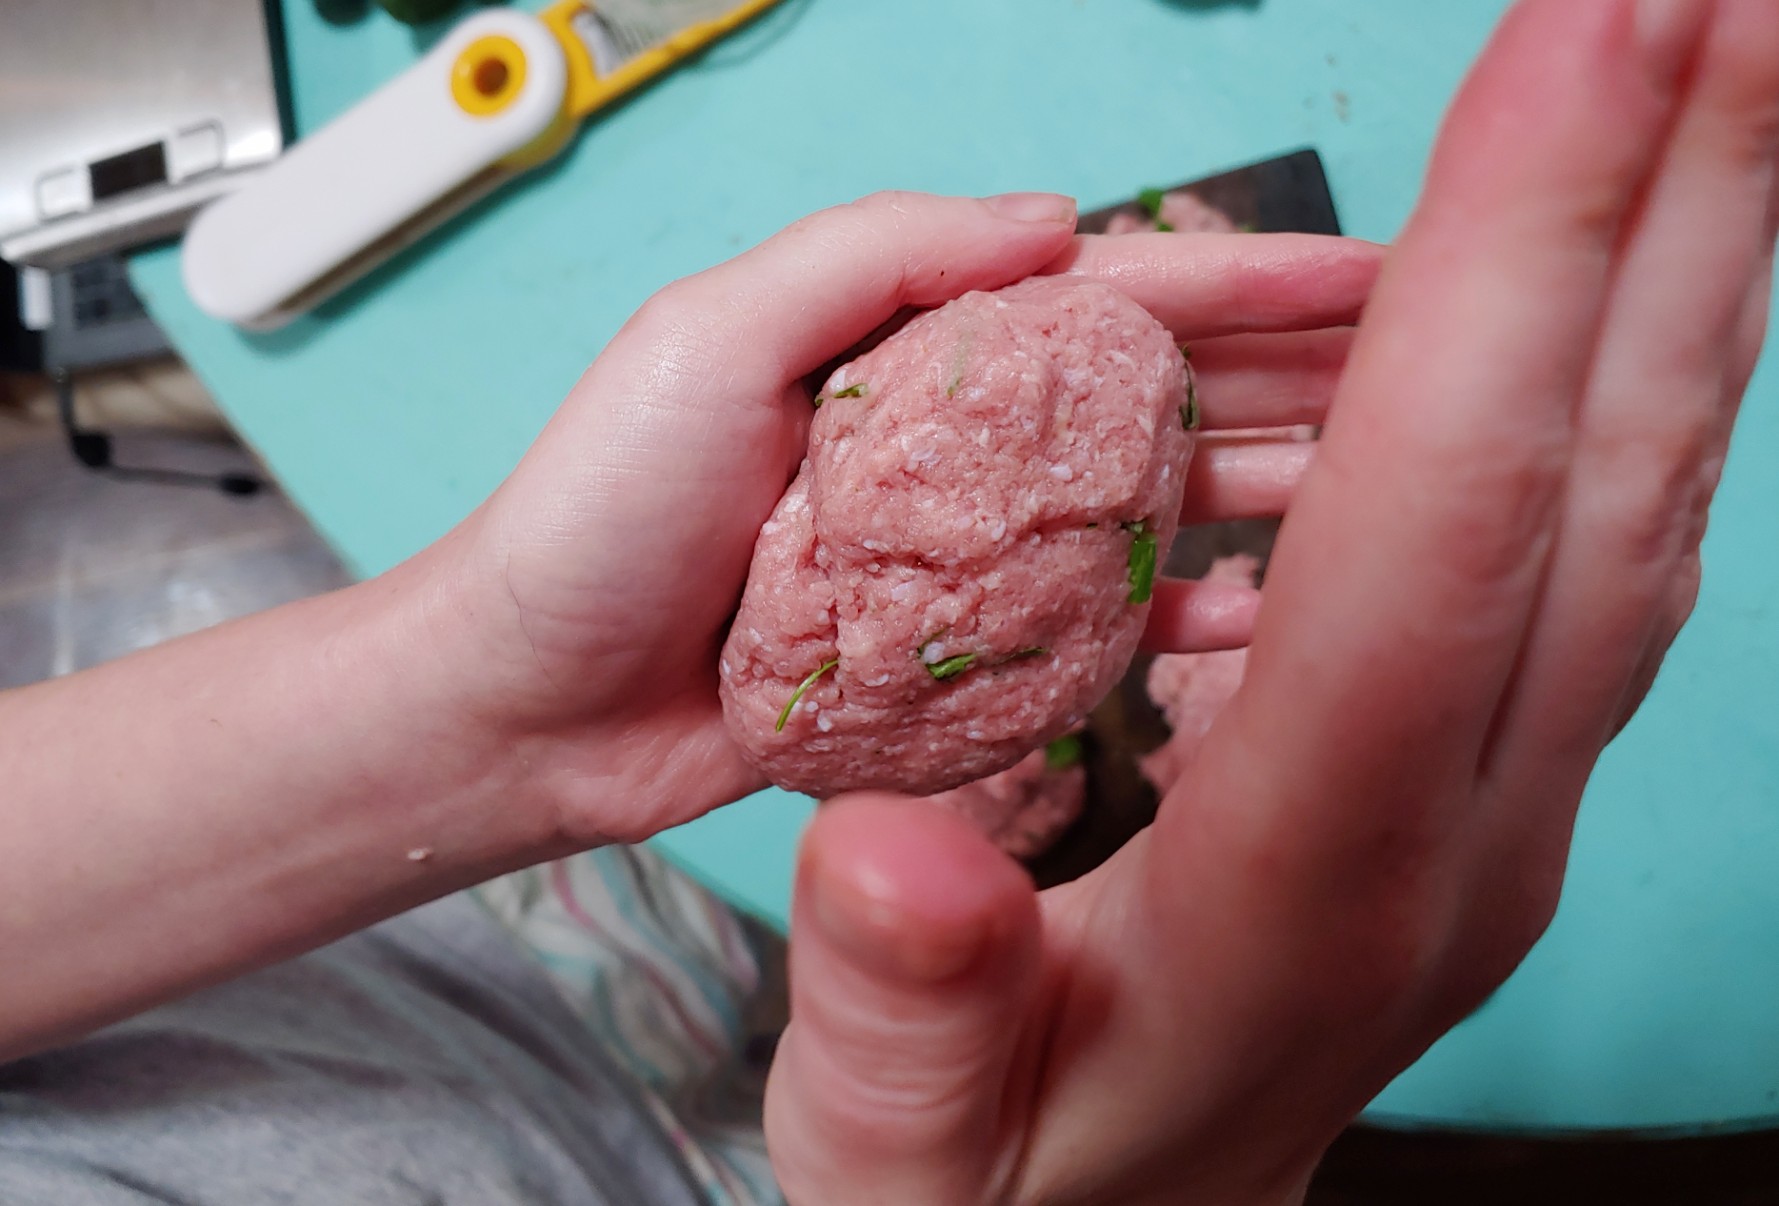 Turkey burger mix being slapped between hands to form patties